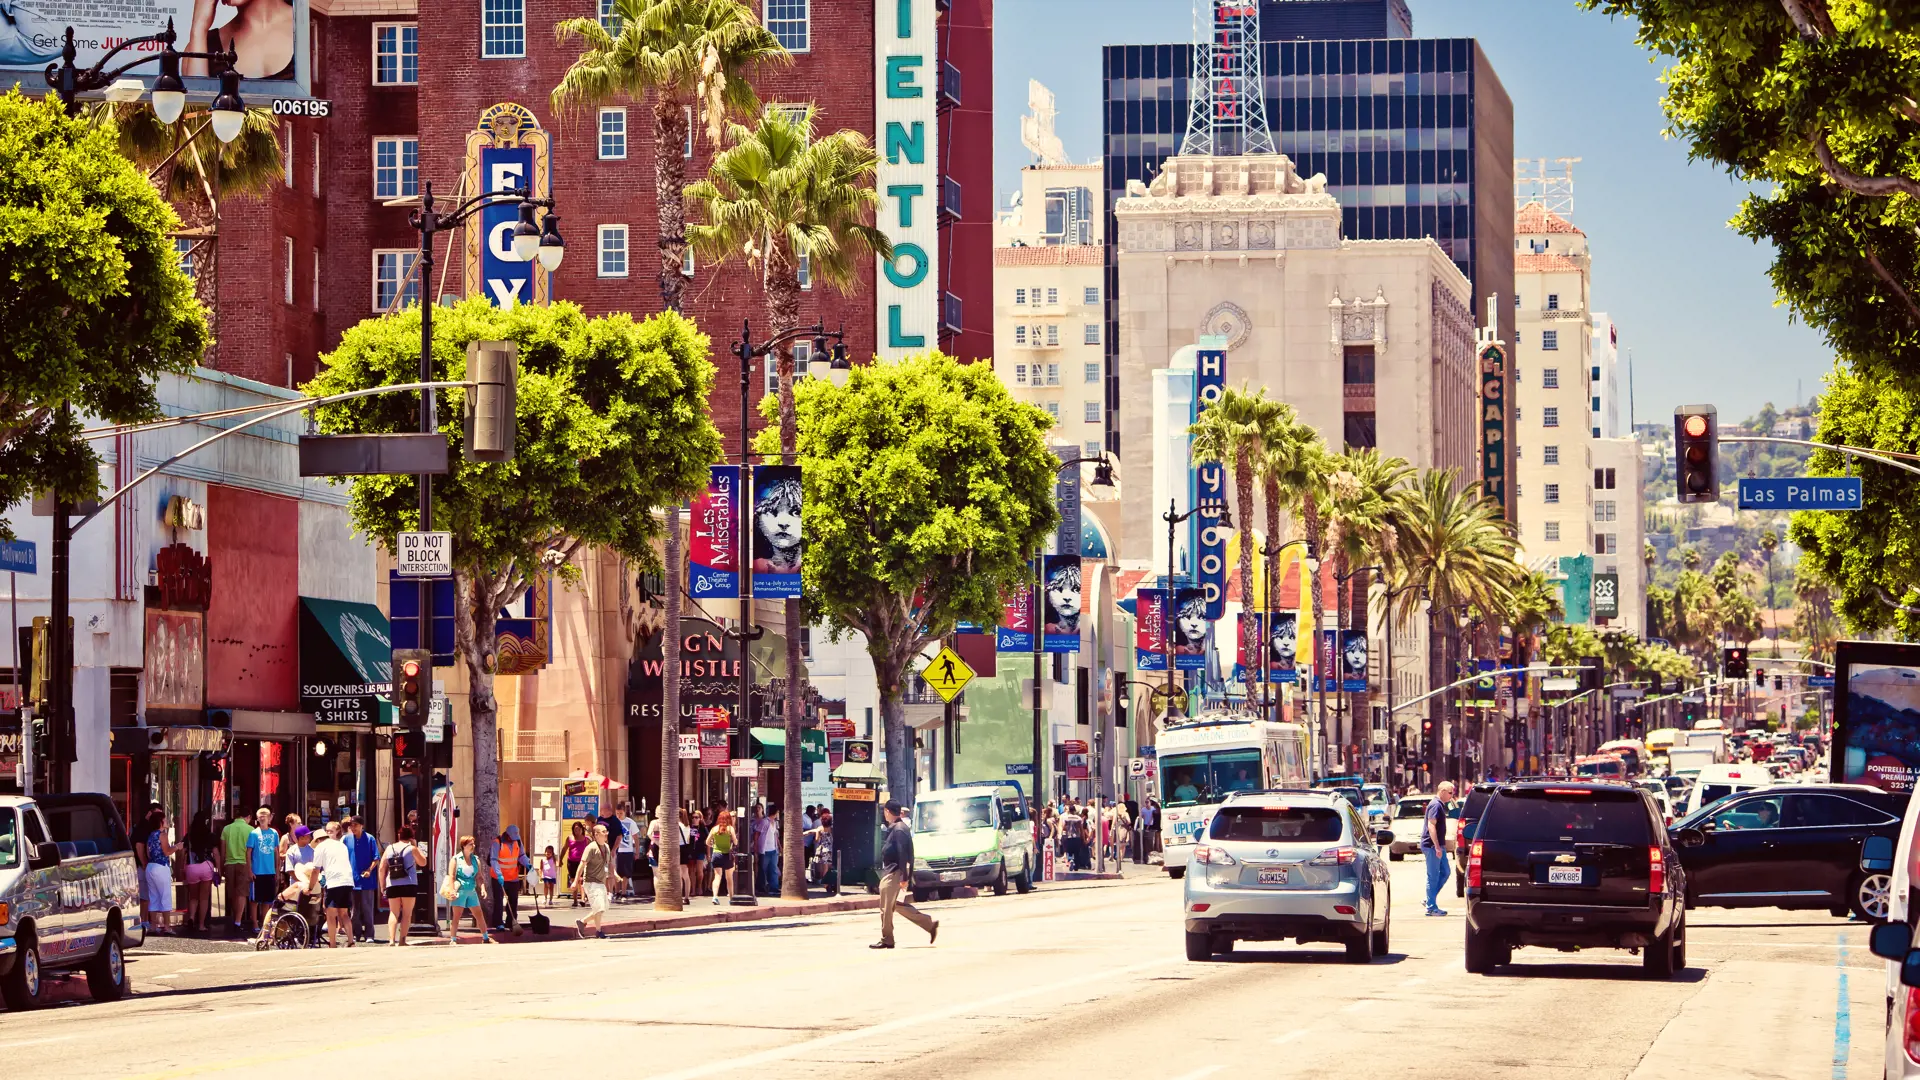 shutterstock_95691955 LOS ANGELES - JULY 19 View of Hollywood Boulevard on July 19, 2011 in Hollywood, CA. In 1958, the Hollywood Walk of Fam.jpg